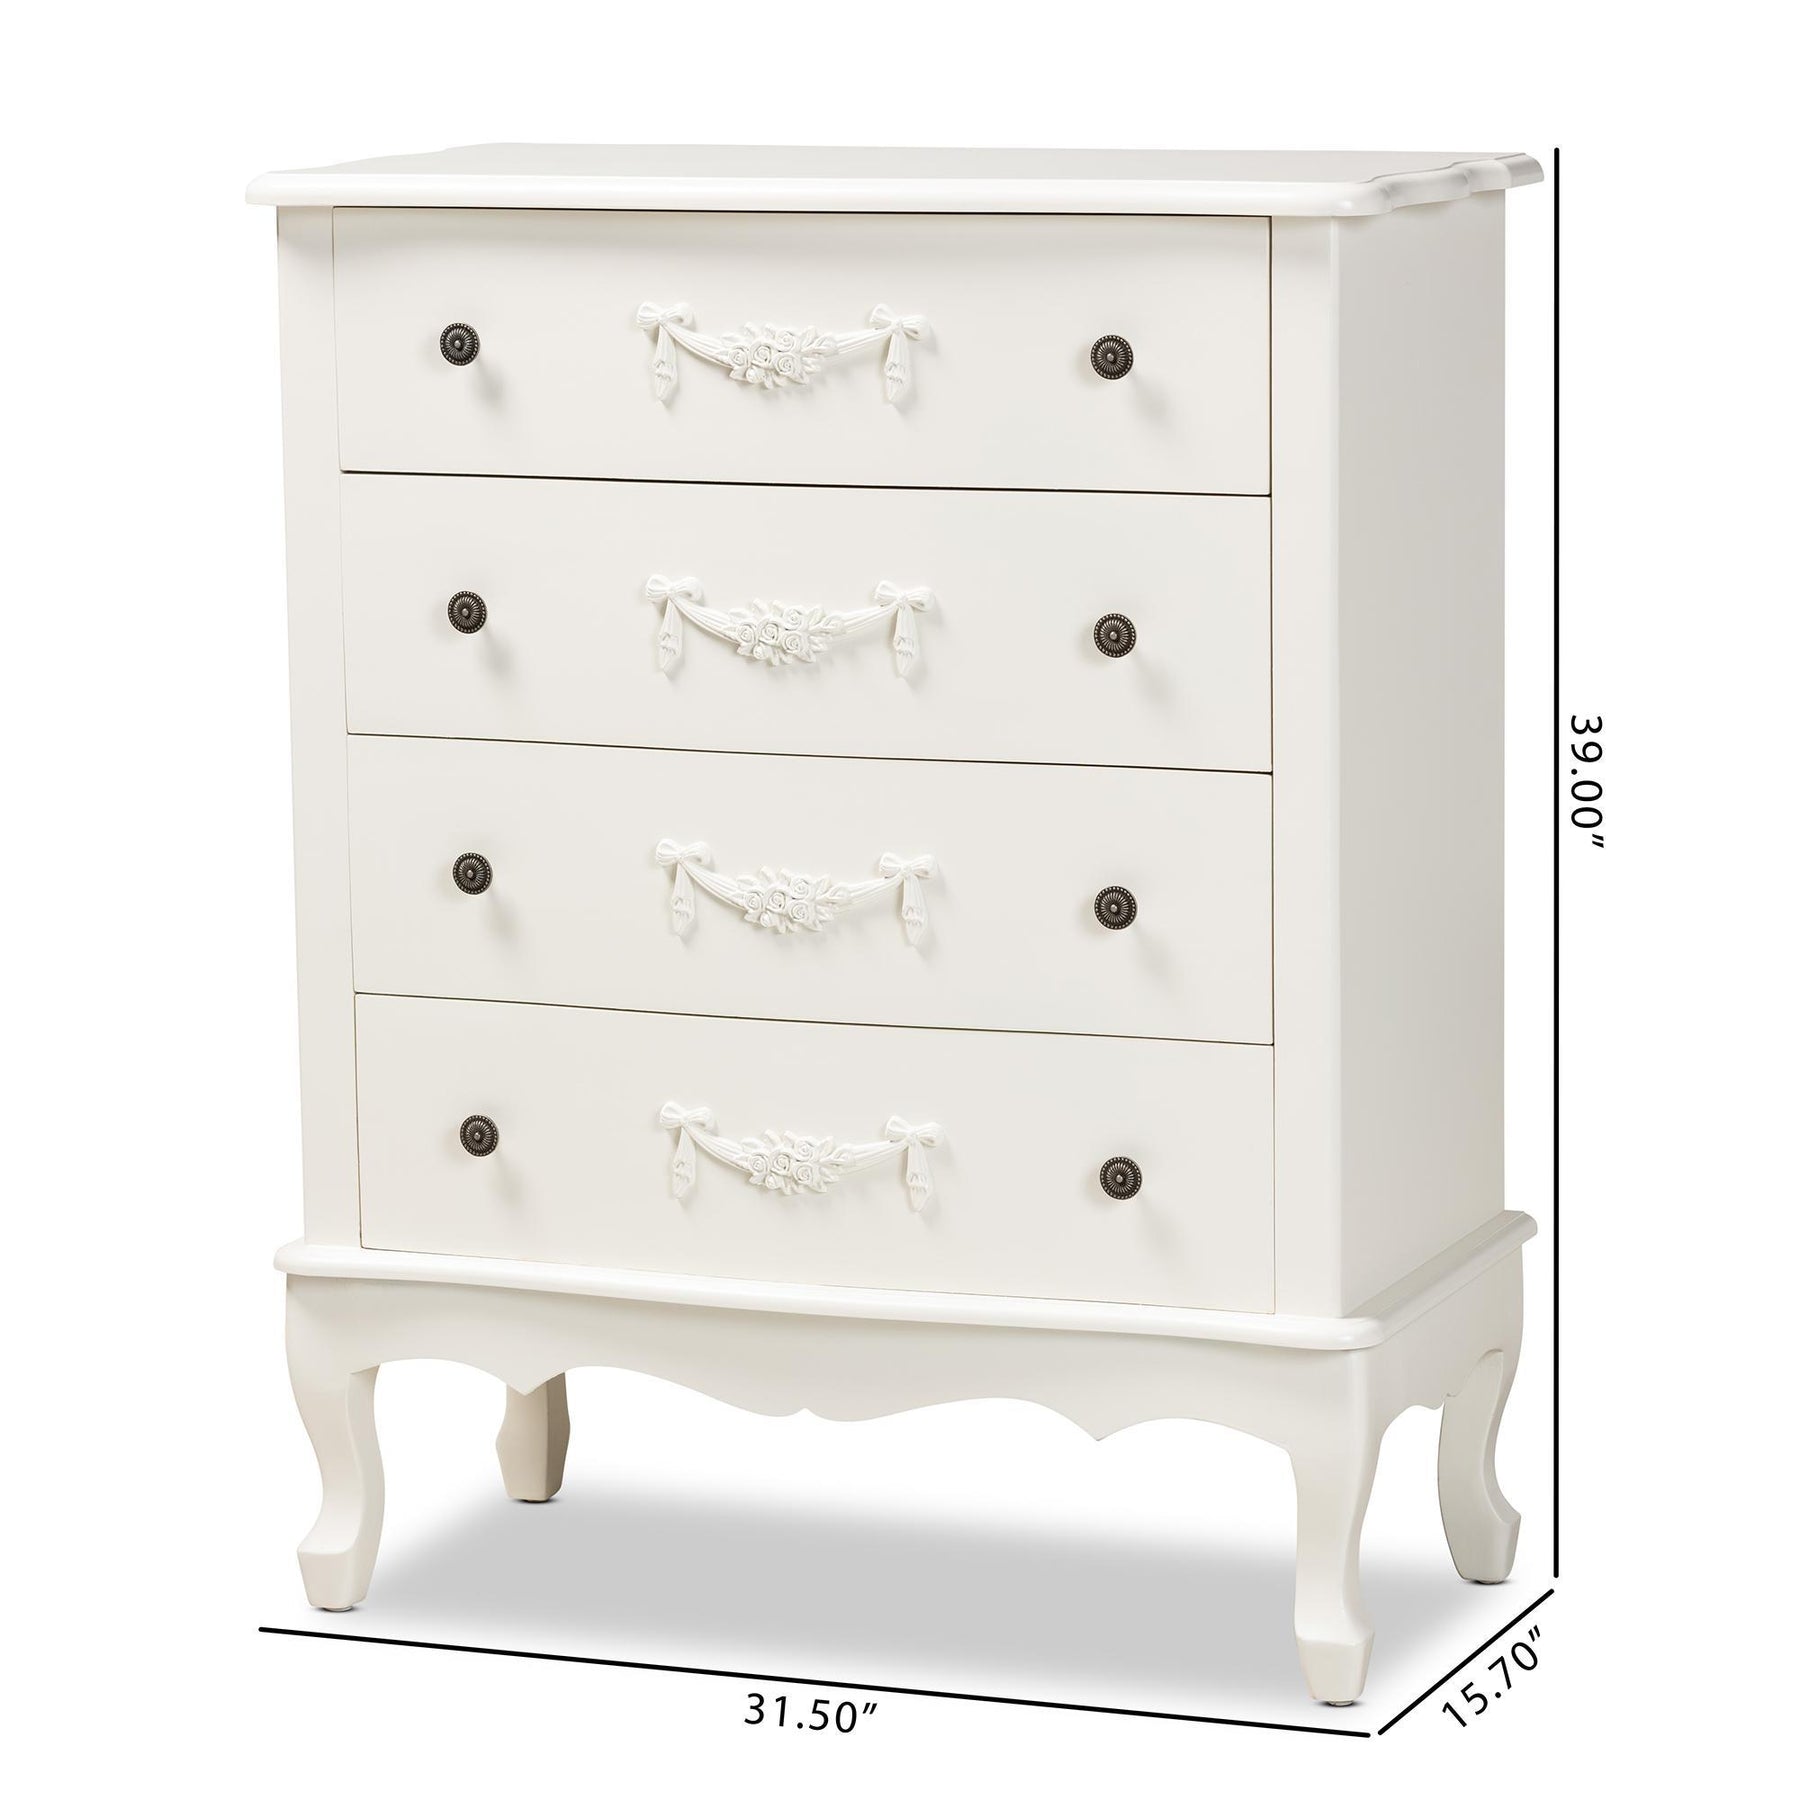 Baxton Studio Callen Classic And Traditional White Finished Wood 4-Drawer Storage Cabinet - JY18B026-White-4DW-Cabinet